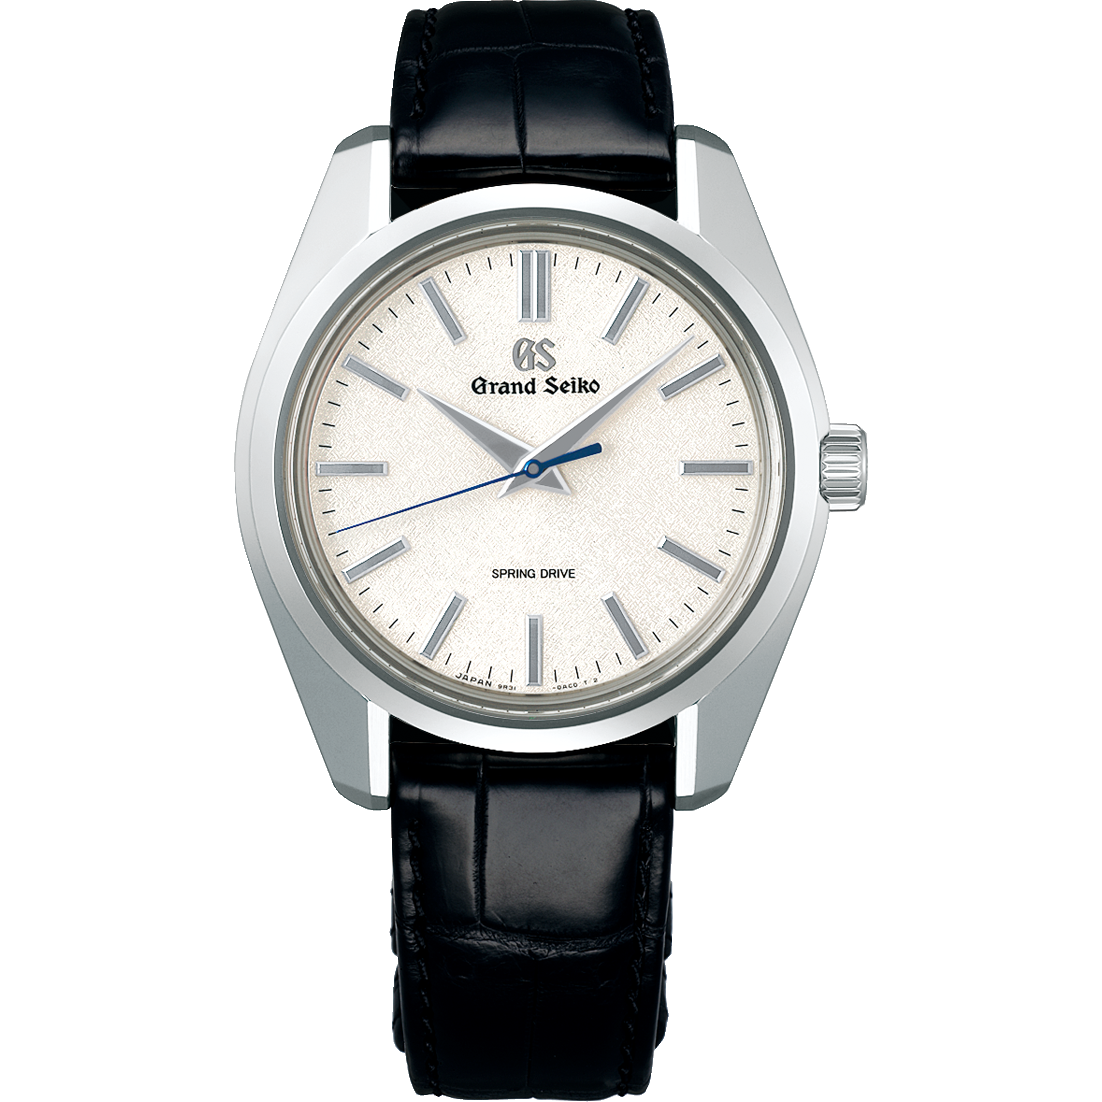 Grand Seiko Heritage Collection Asaborake Spring Drive White Dial Watch SBGY011G